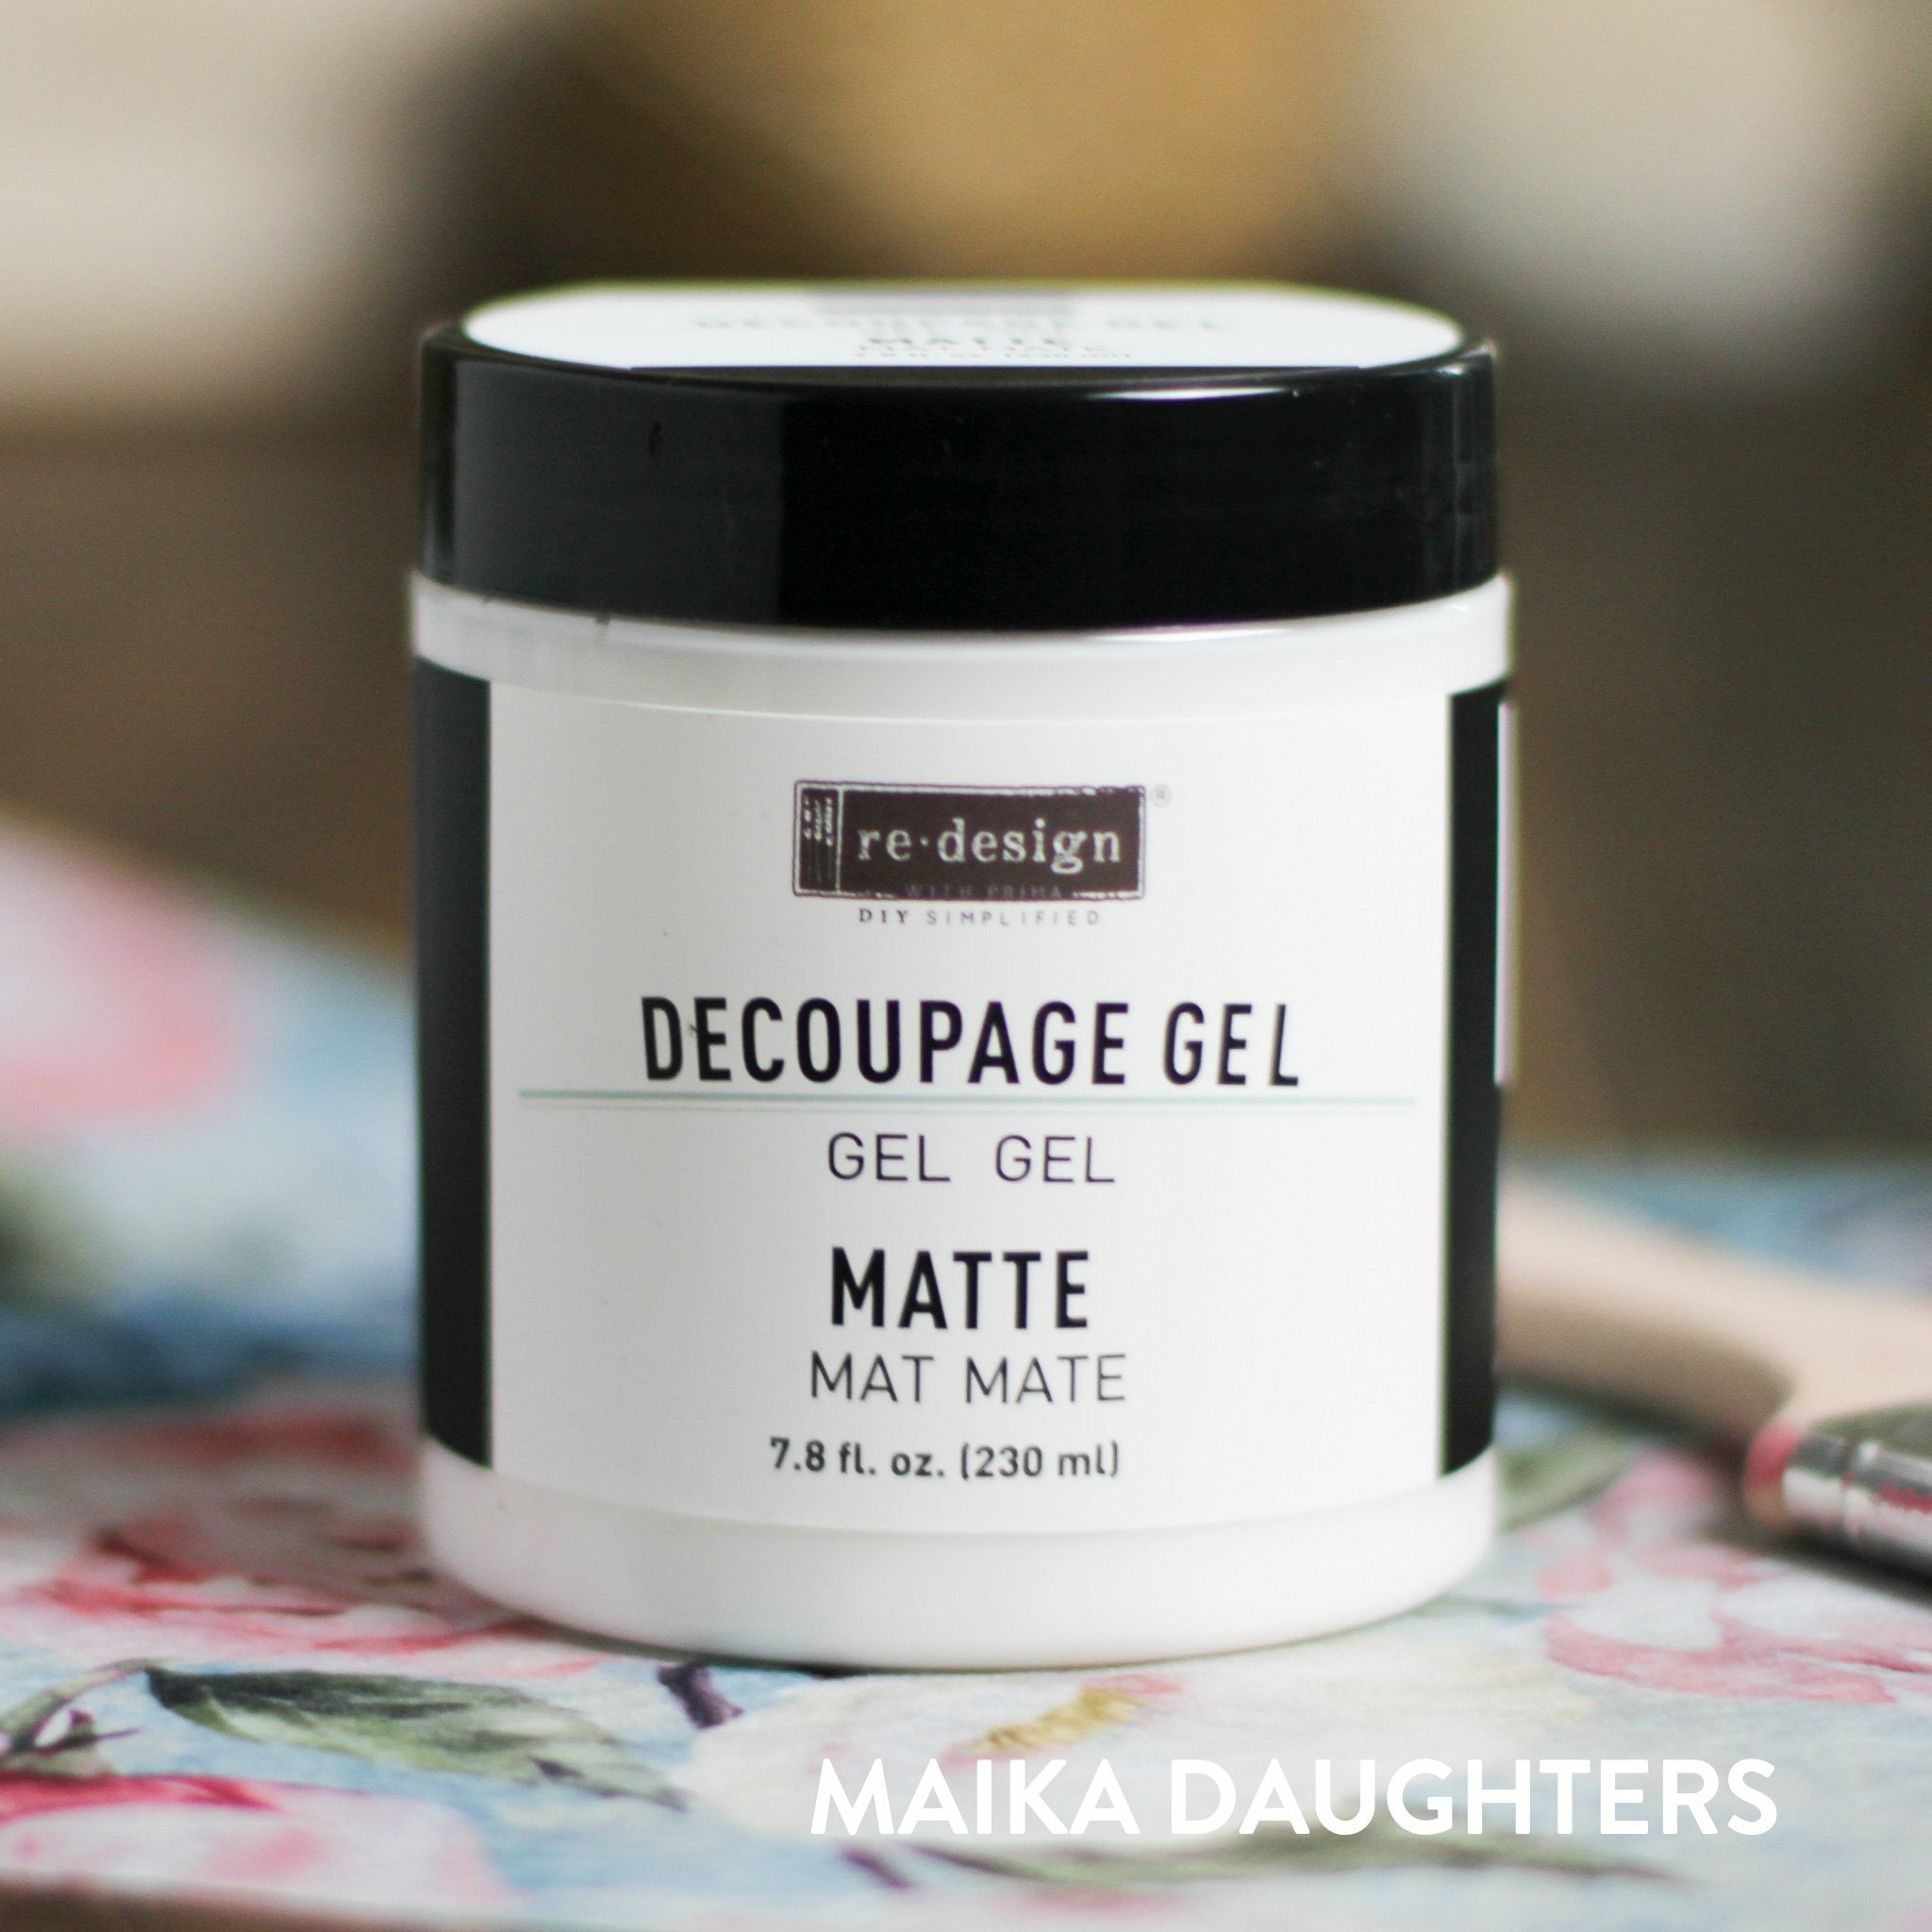 A white container with a black lid and a black text logo reading: Redesign diy simplified. Decoupage Gel. Gel. Gel. Matte. Mat. Mate. 7.8 fl. oz. (230 ml) On the bottom right corner is white text reading Maika Daughters.